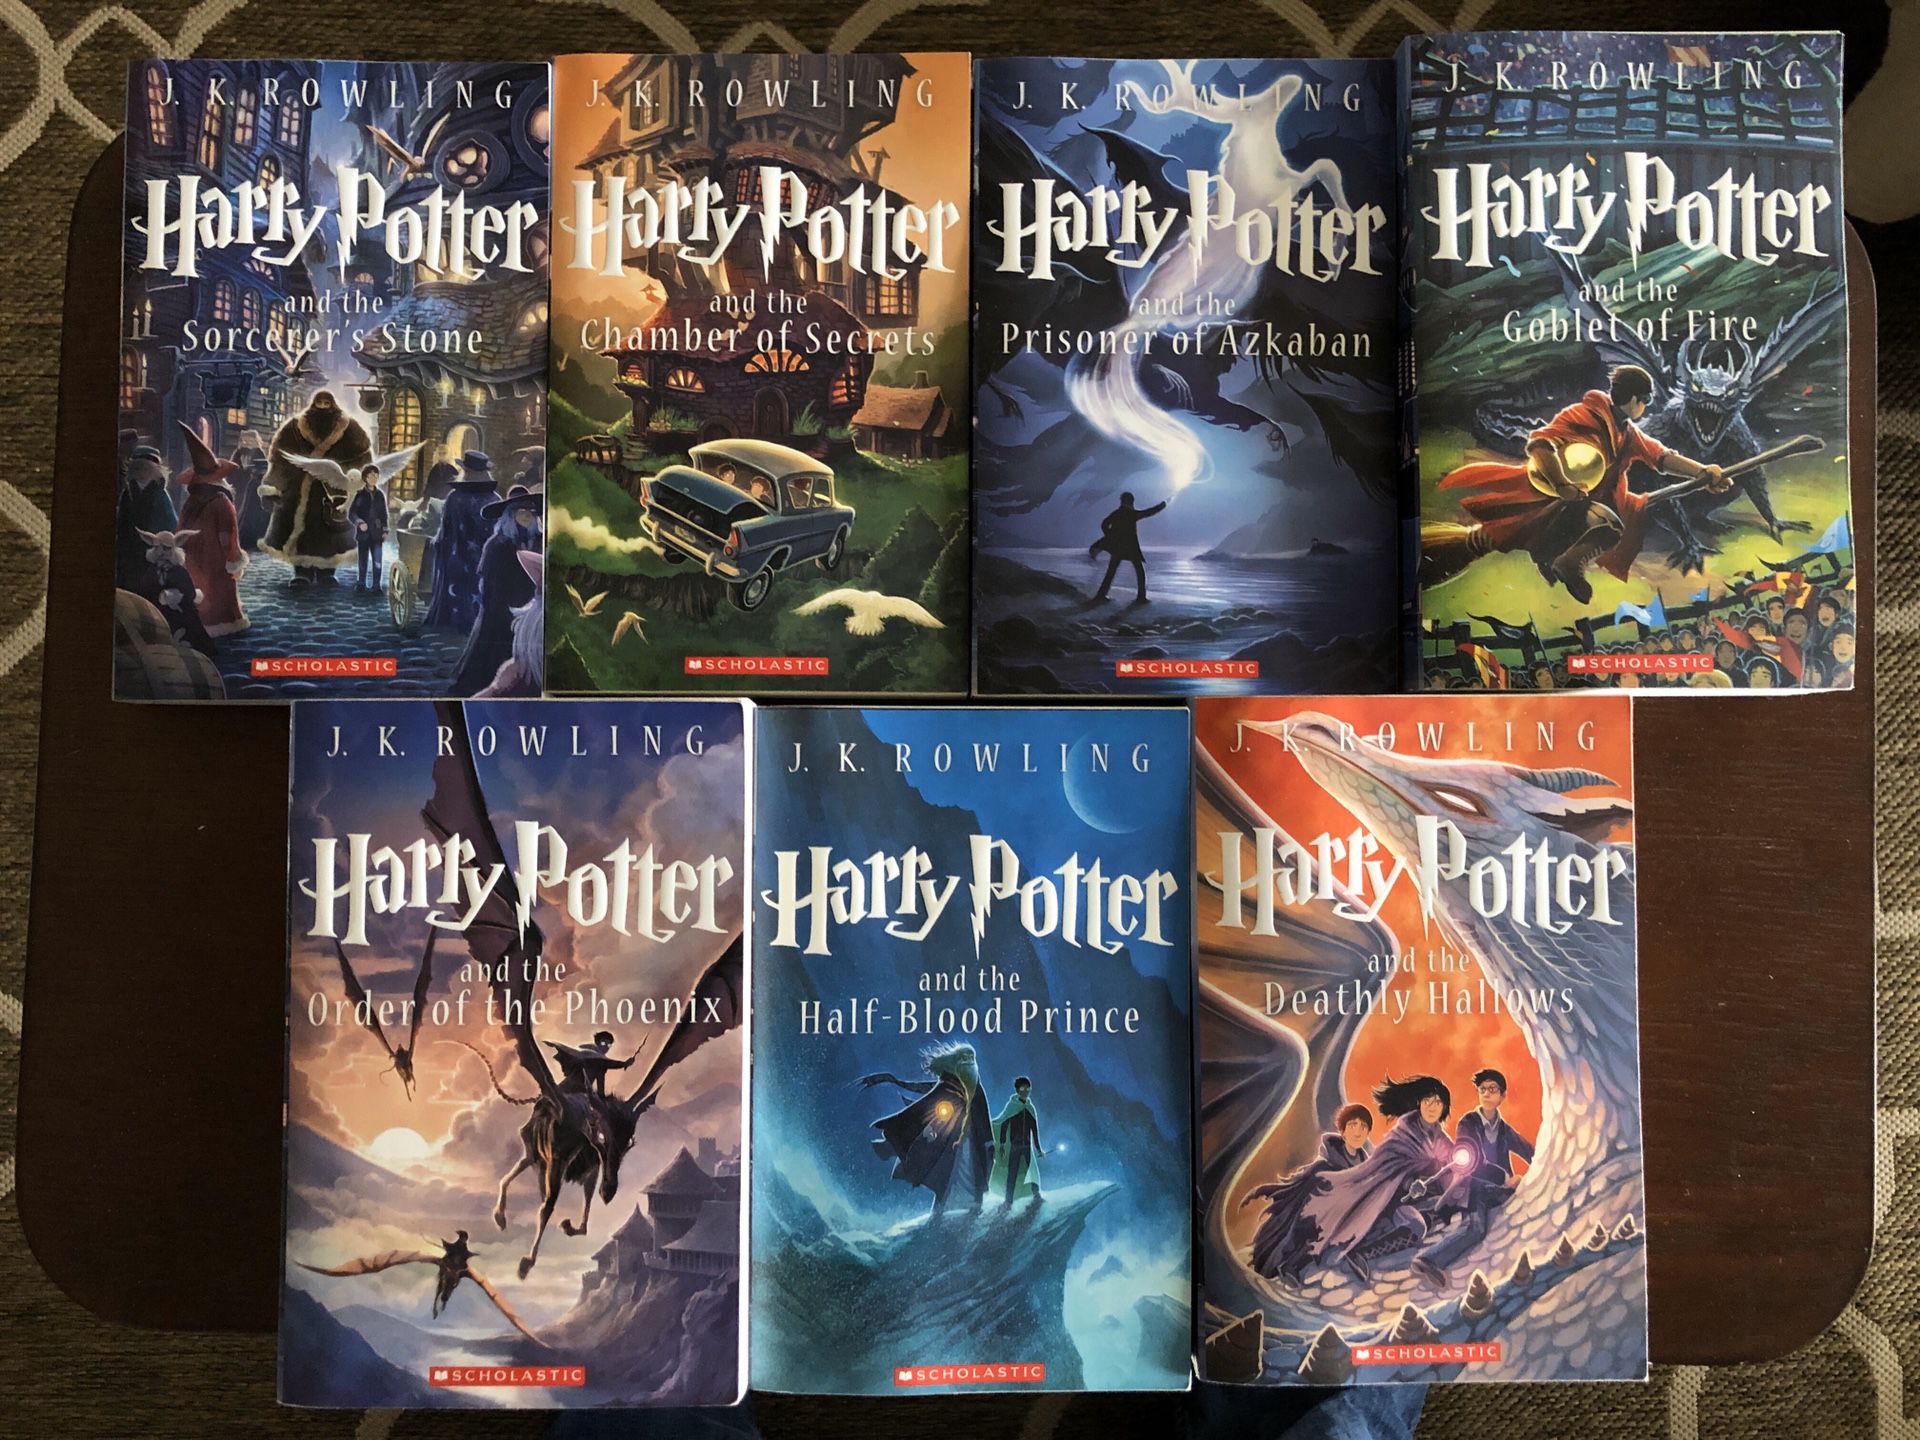 Harry Potter compleat books set